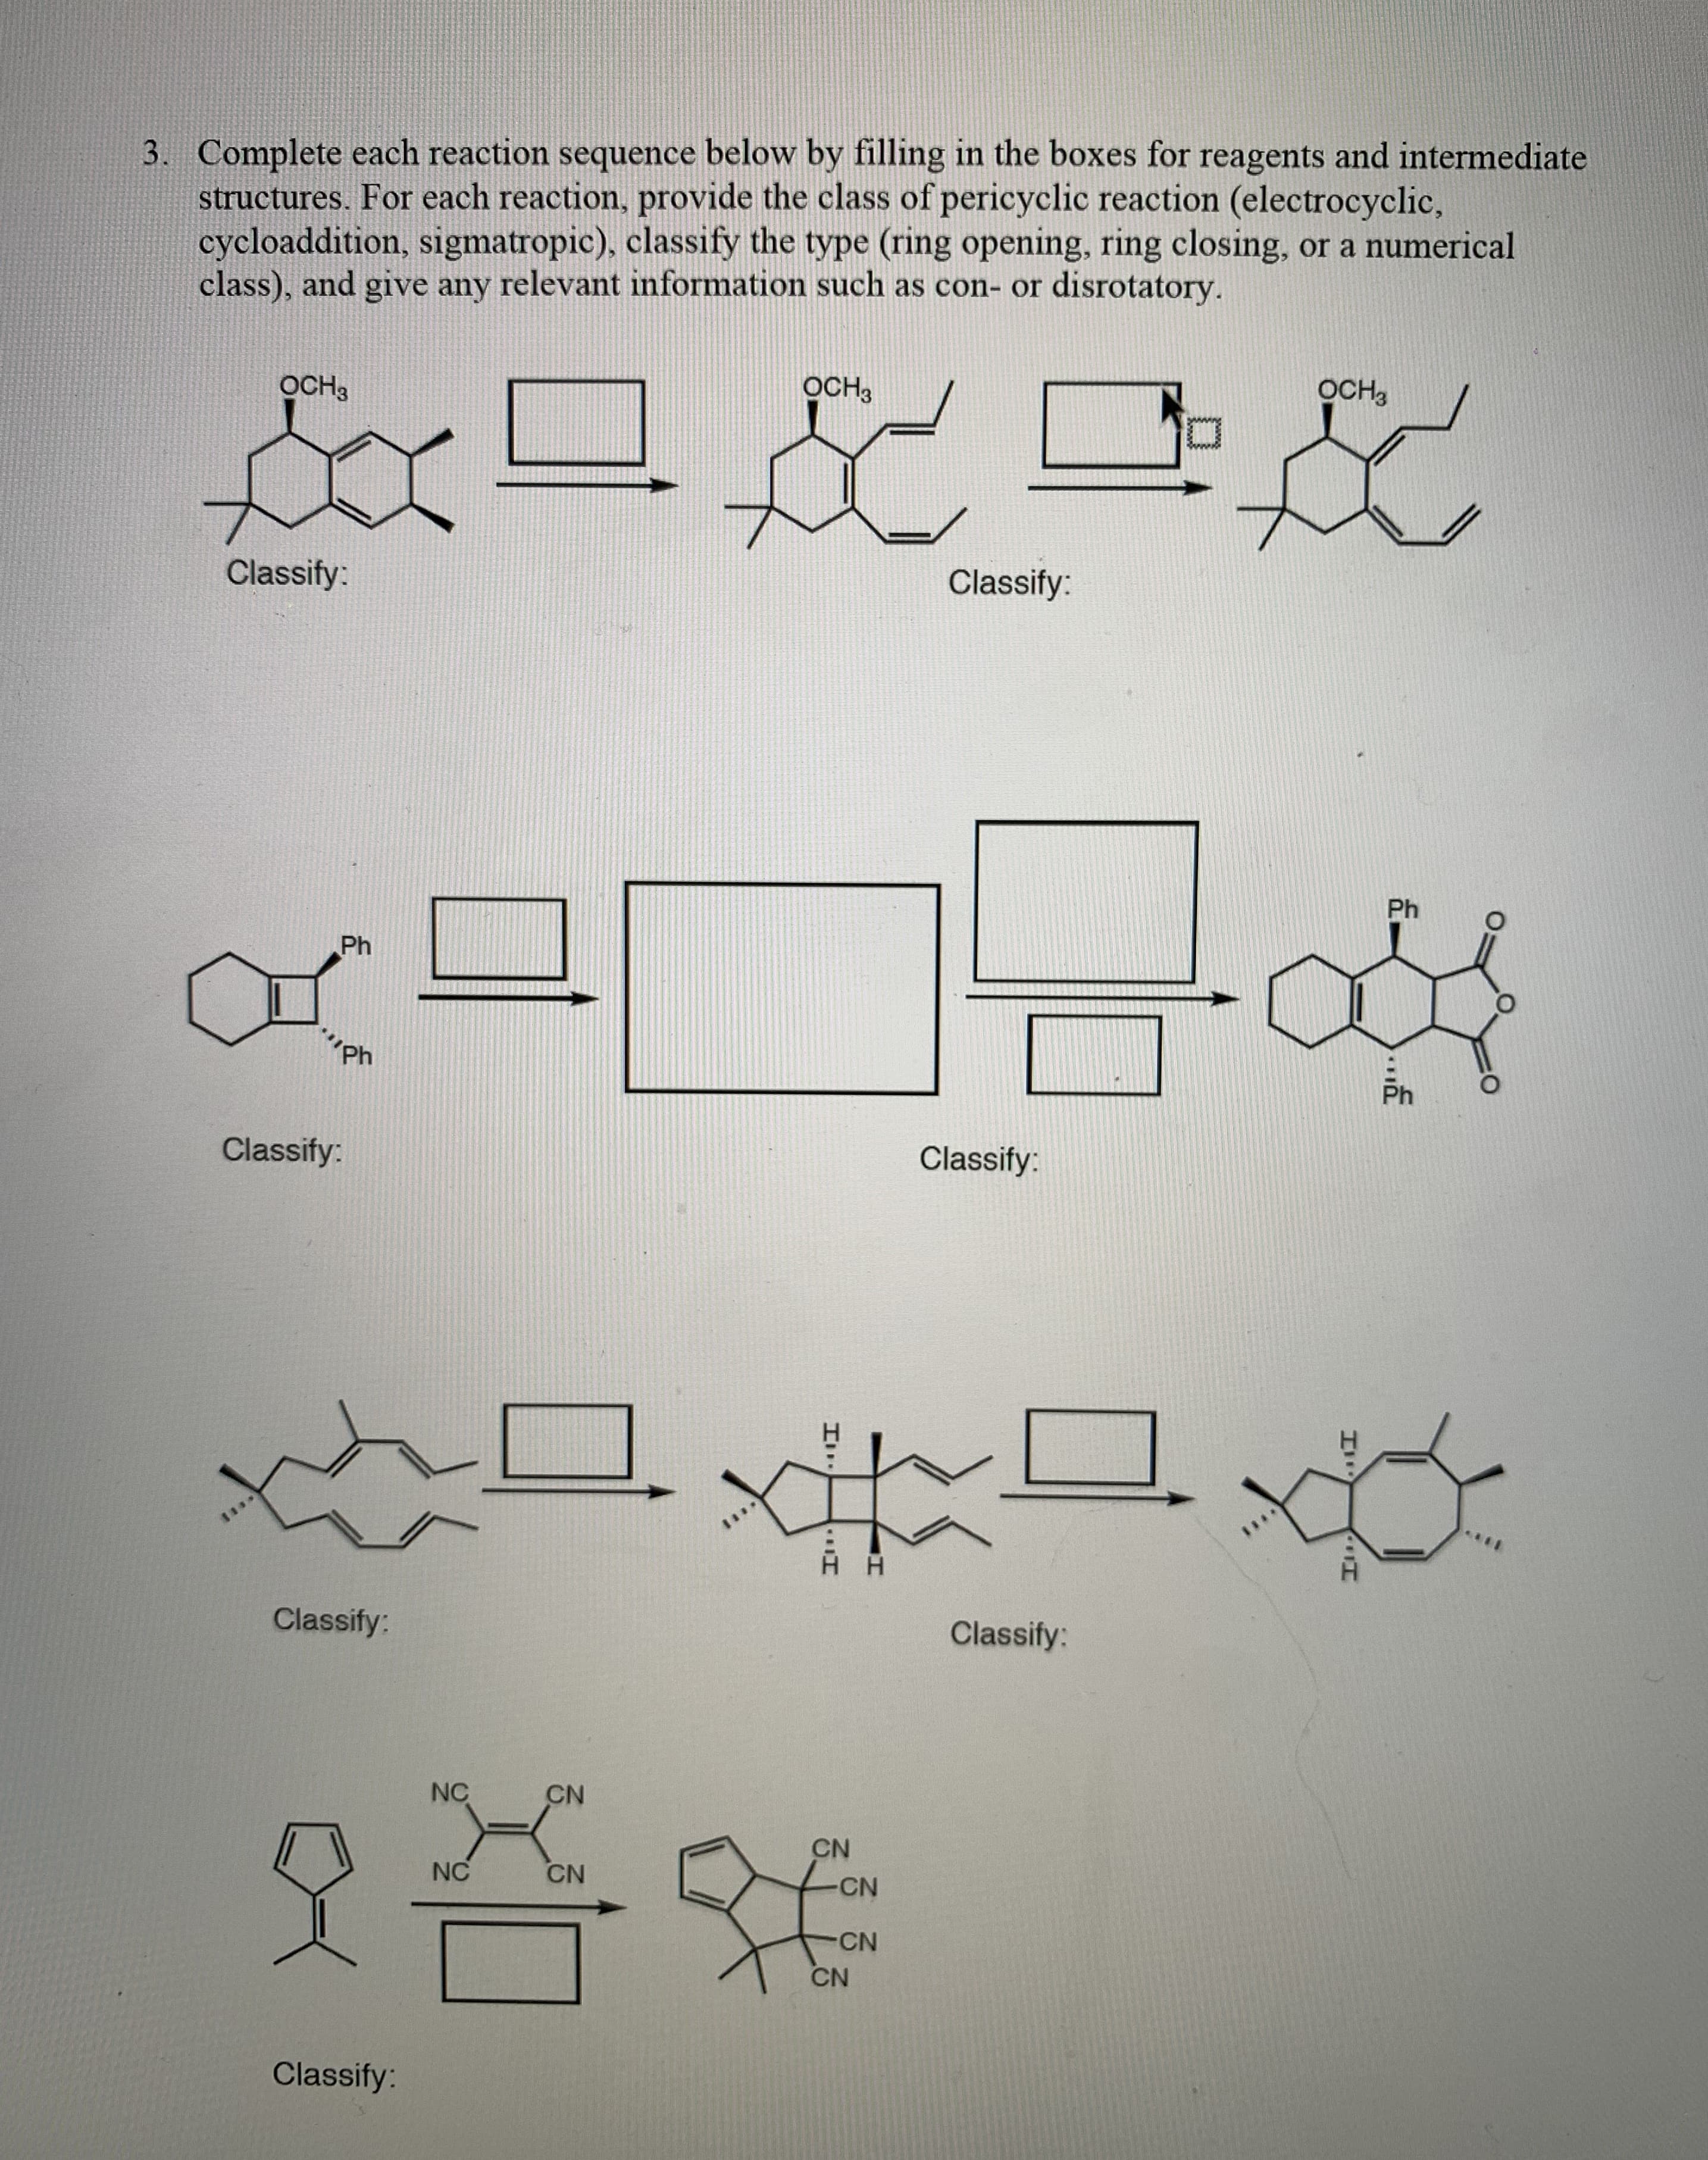 Complete each reaction sequence below by filling in the boxes for reagents and intermediate
structures. For each reaction, provide the class of pericyclic reaction (electrocyclic,
cycloaddition, sigmatropic), classify the type (ring opening, ring closing, or a numerical
class), and give any relevant information such as con- or disrotatory.
OCH3
OCH,
OCH3
Classify:
Classify:
